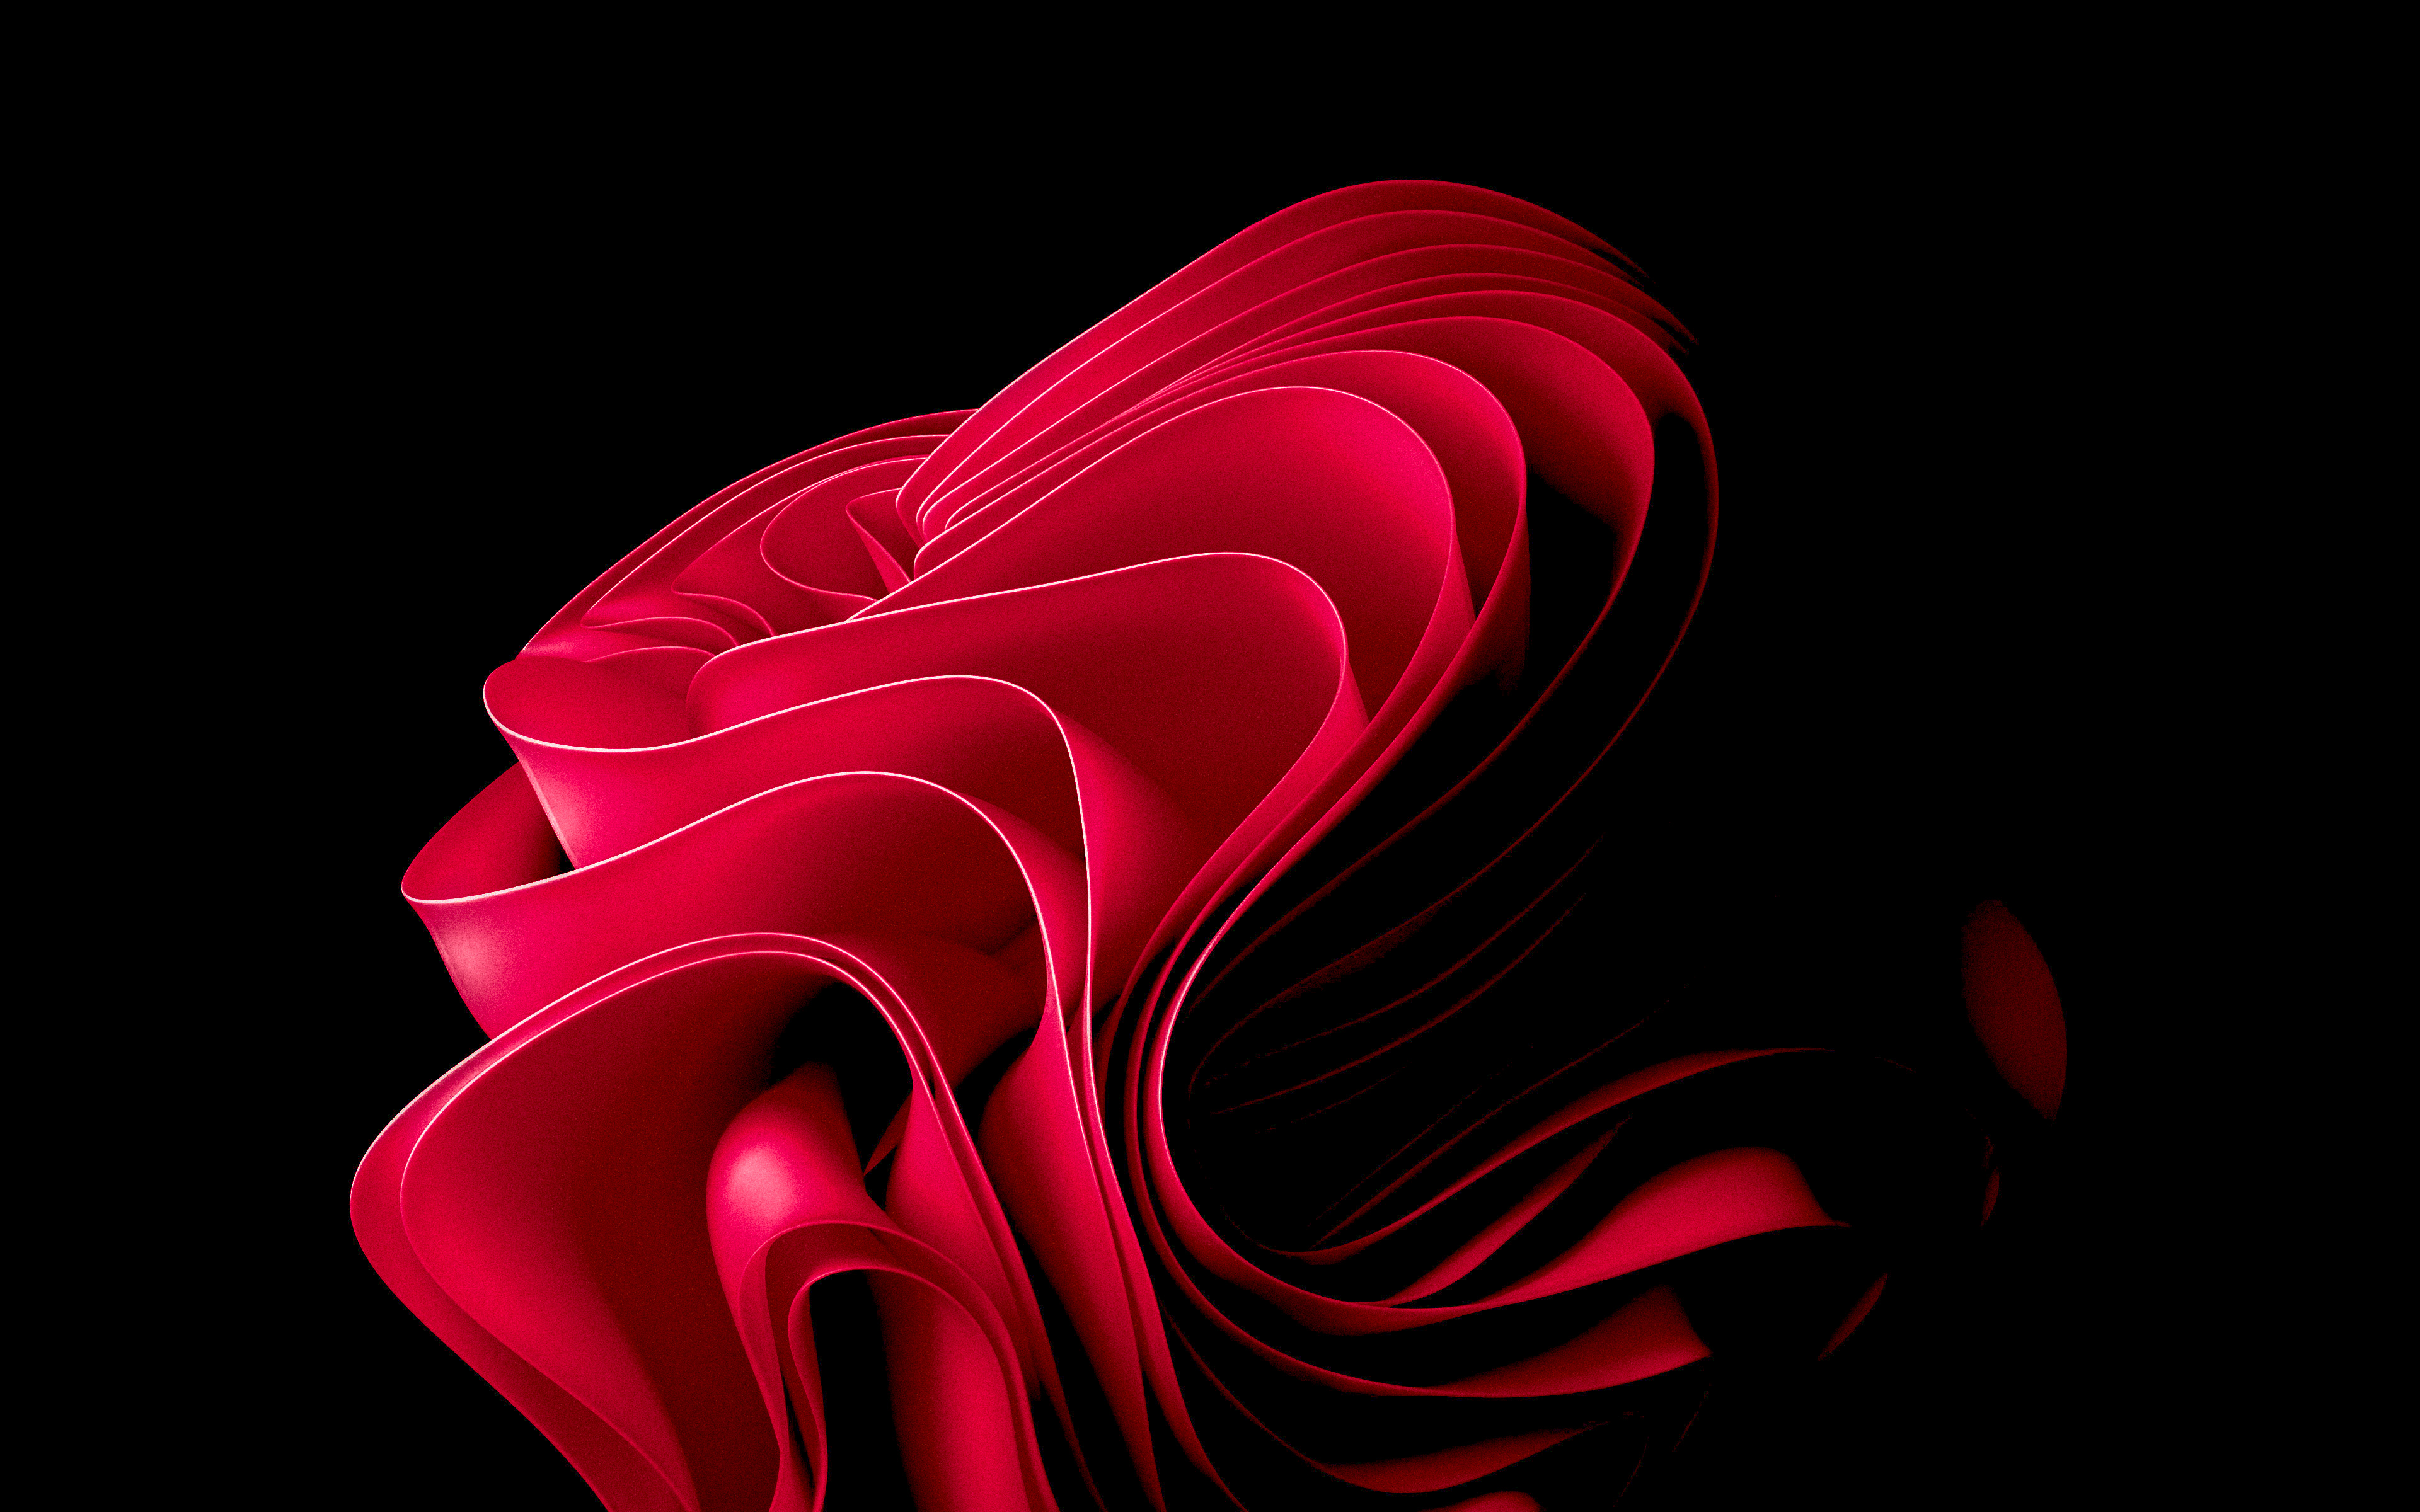 Windows 11 Wallpaper 4K, Stock, Red abstract, Abstract